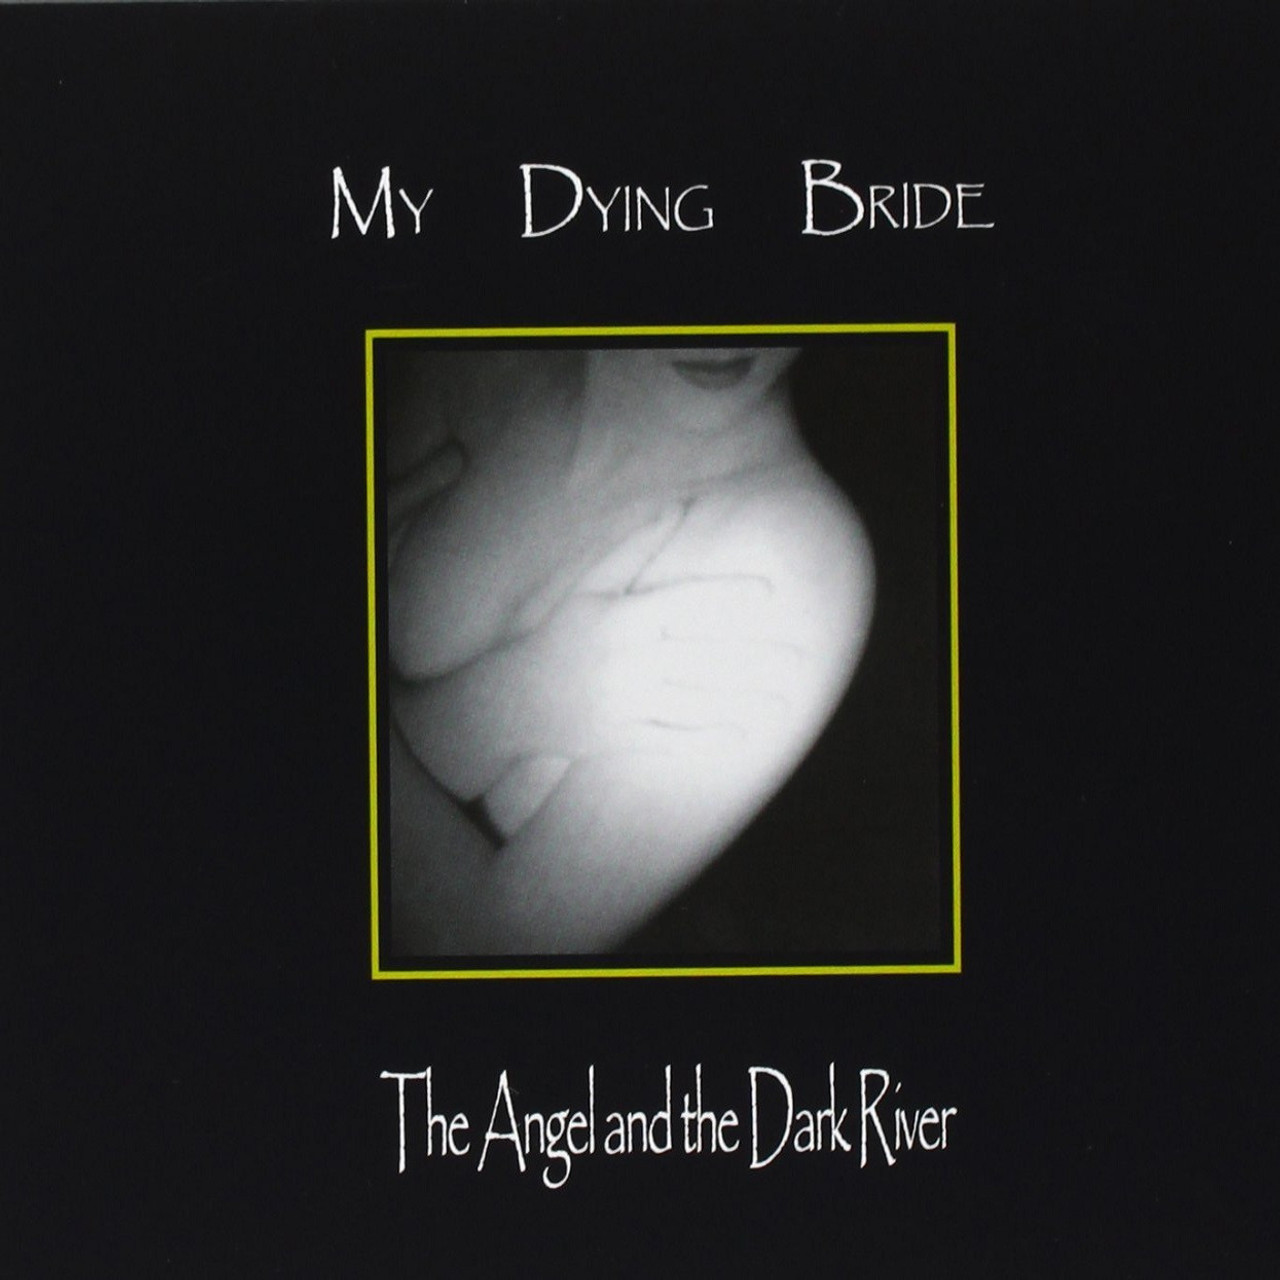 My Dying Bride 'The Angel and The Dark River' 2LP Vinyl